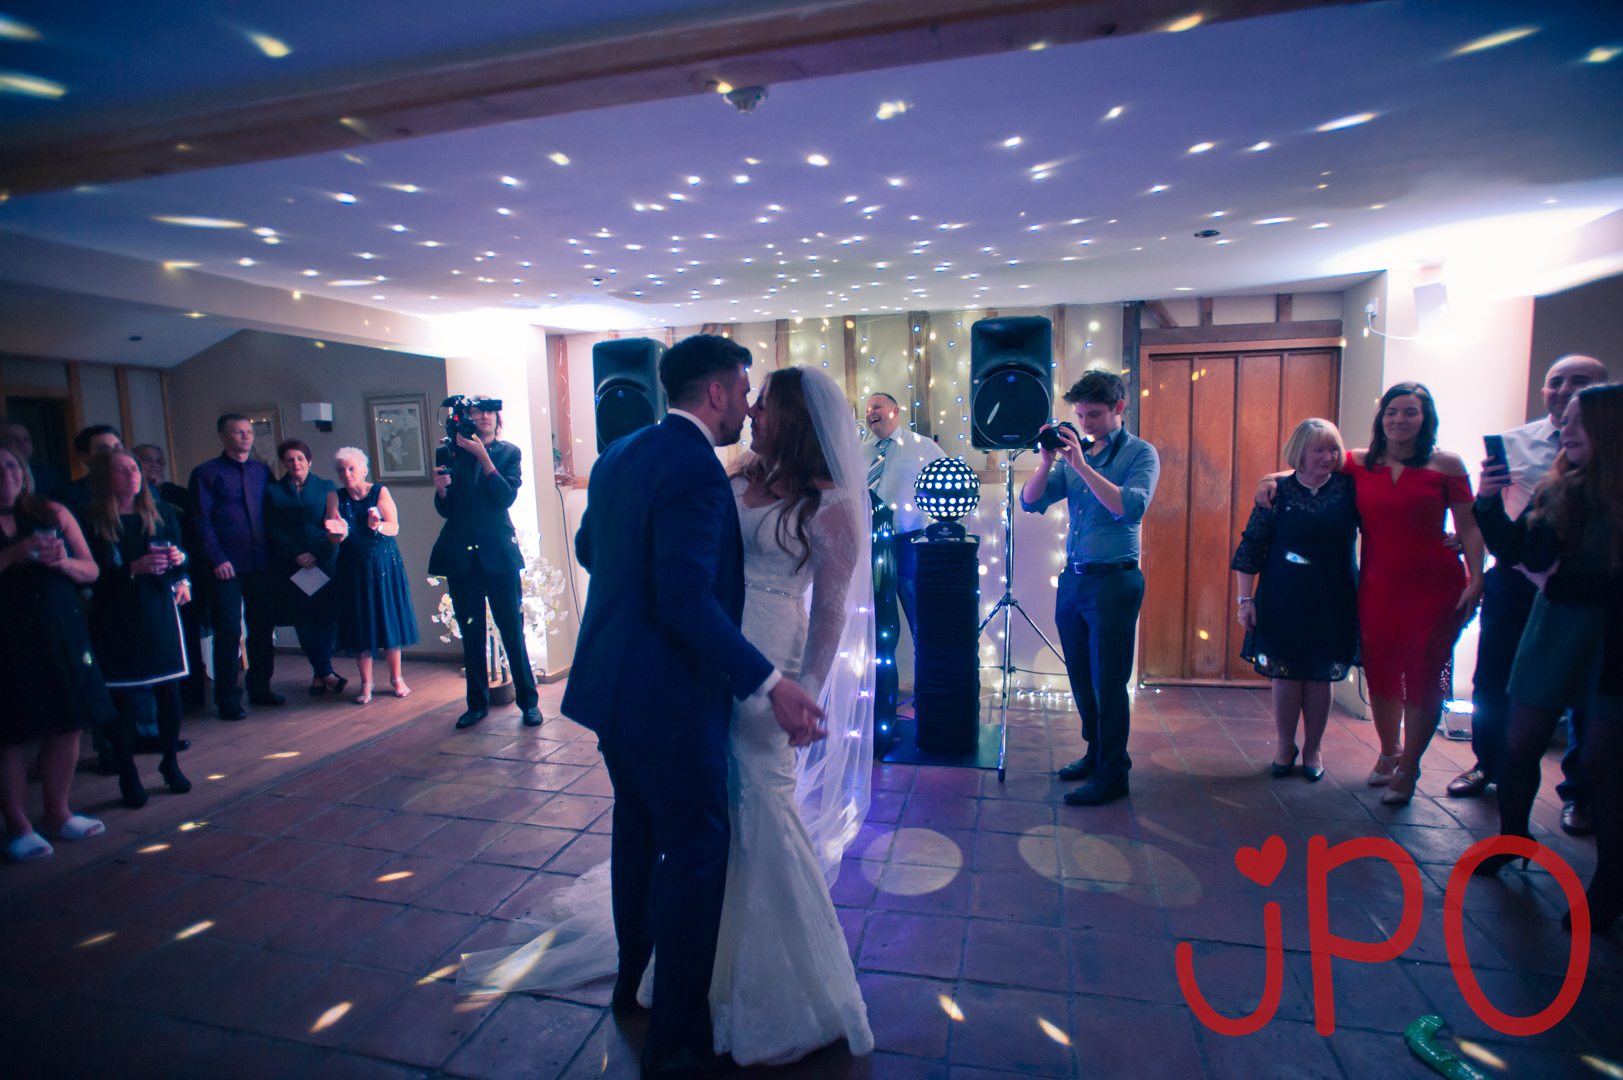 Sam and Luke’s wedding at coltsfoot country retreat herts